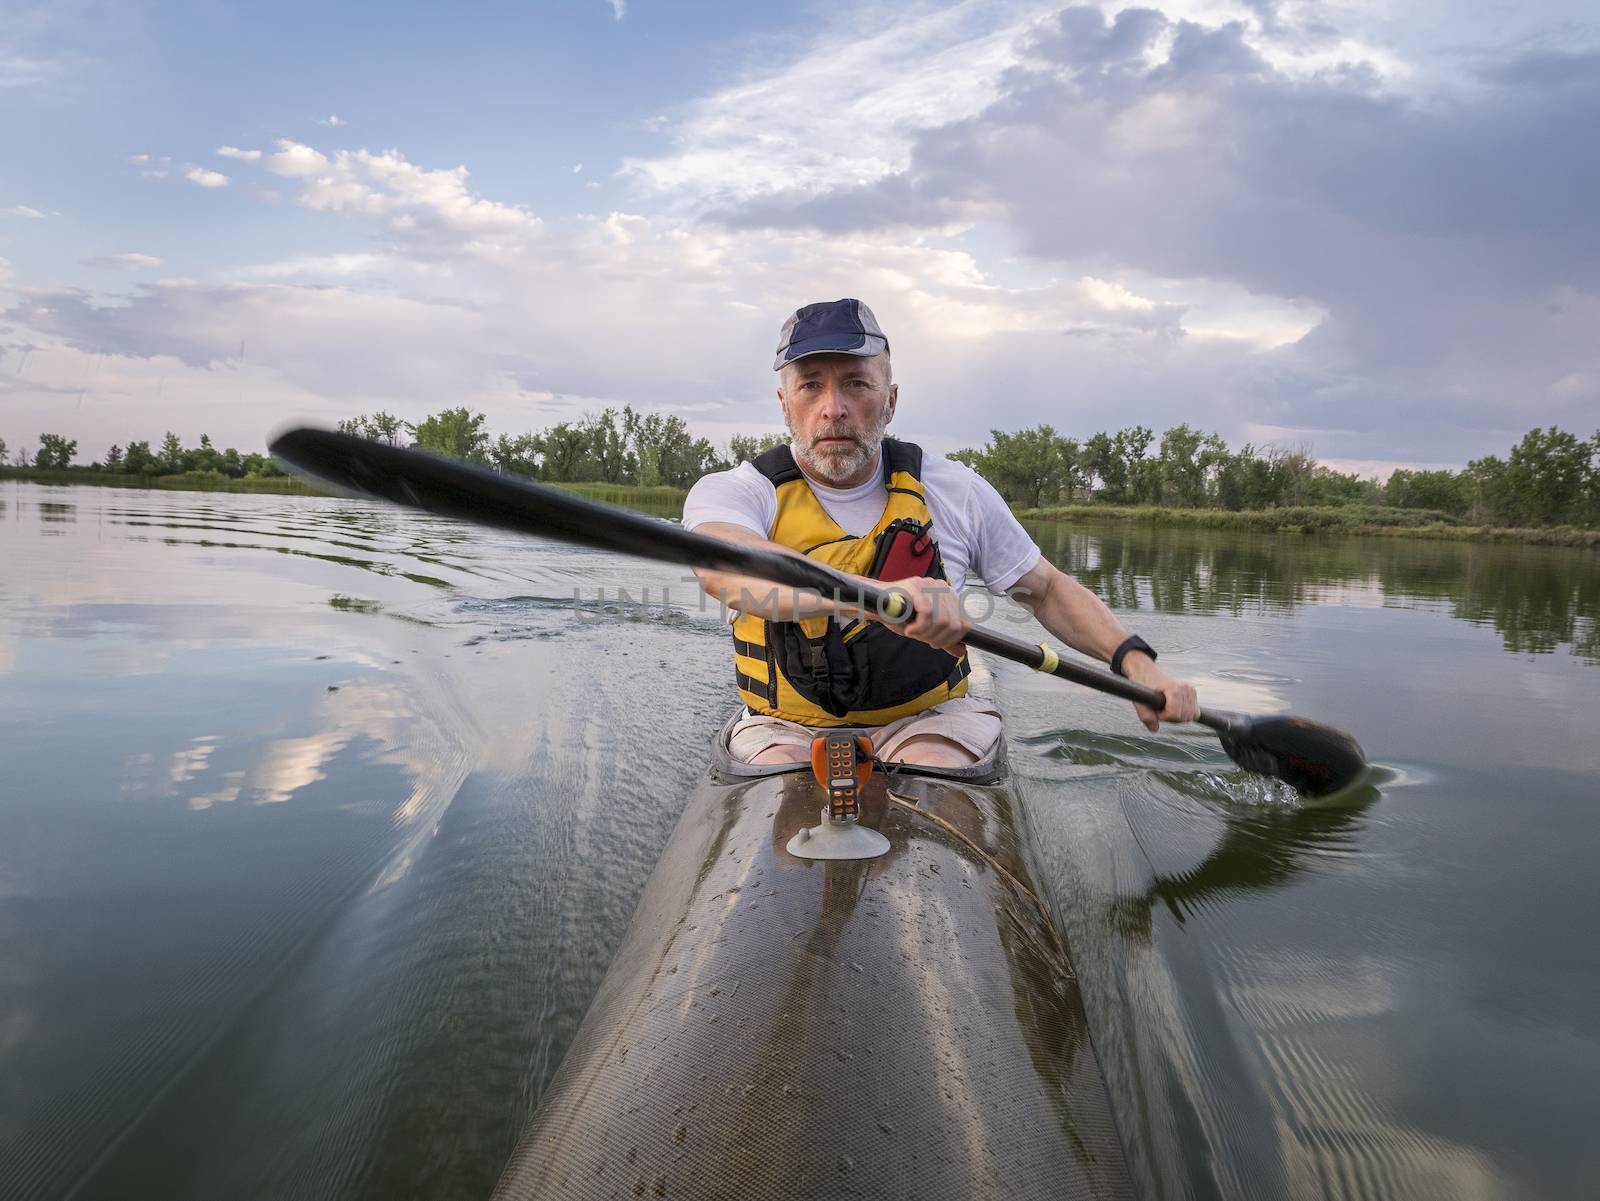 senior male is  paddling racing sea kayak  on a calm lake with storm clouds in background, Fort Collins, Colorado